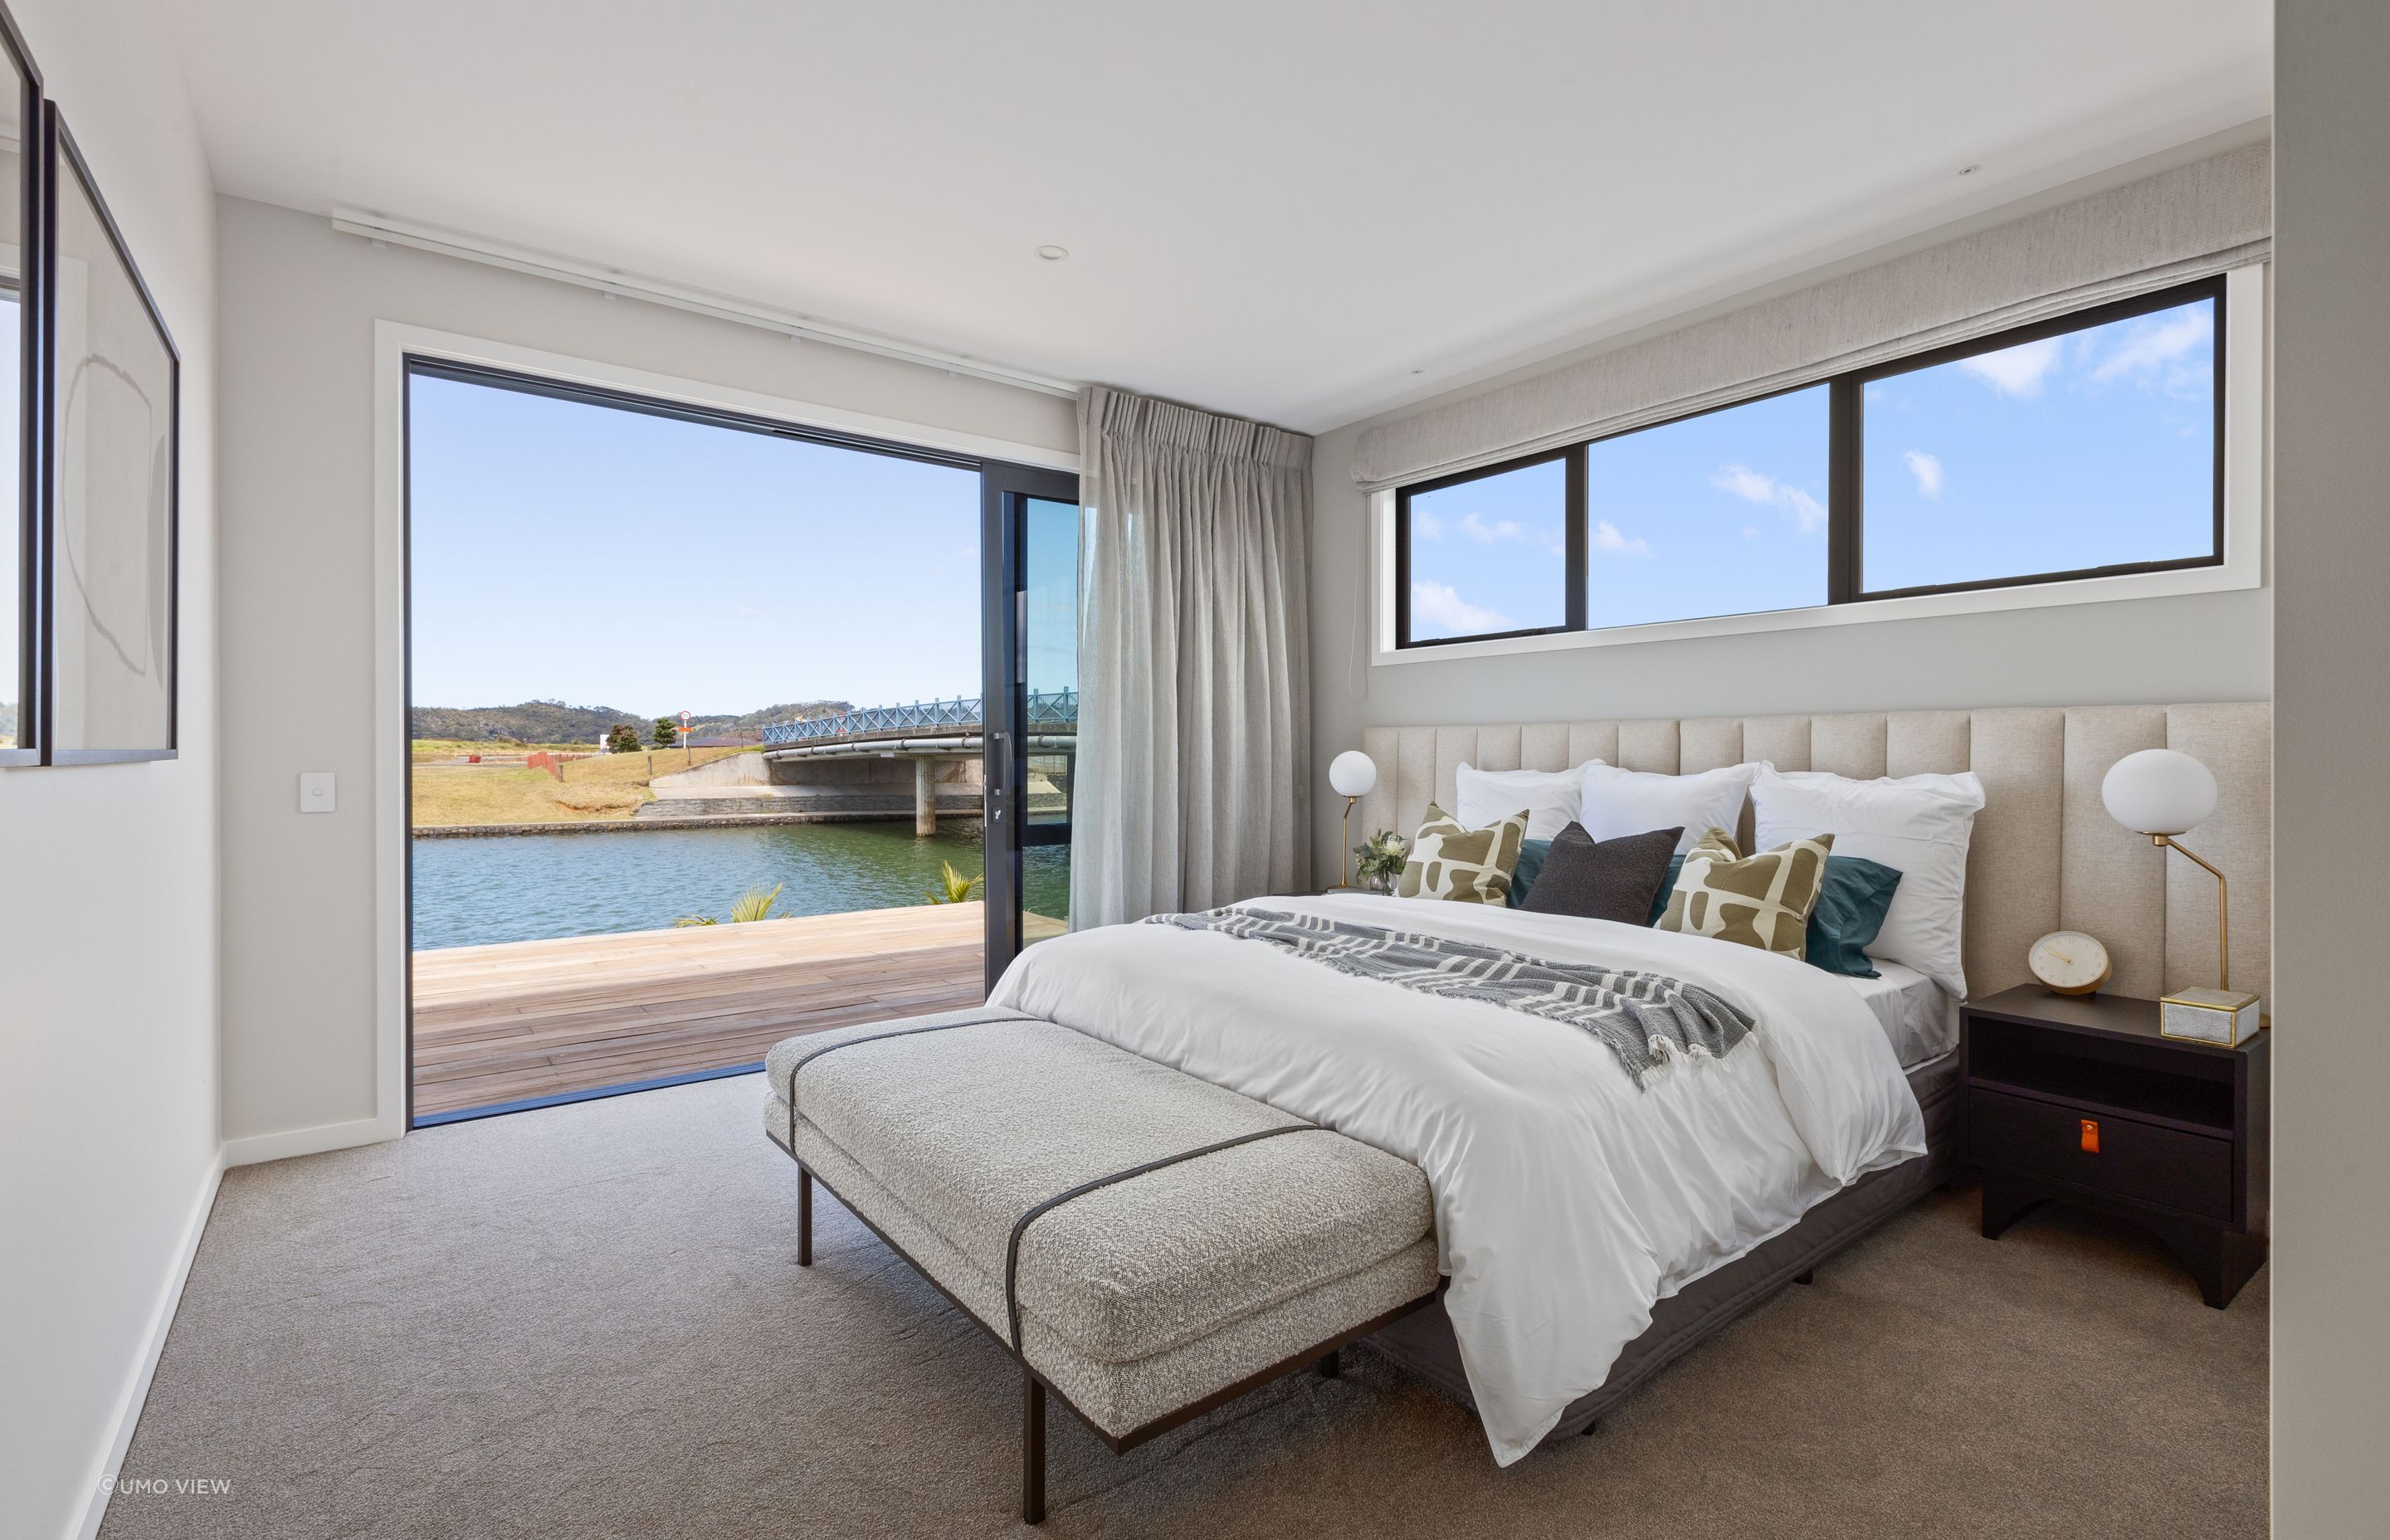 A retreat for relaxation, the master bedroom also enjoys the stunning water view.